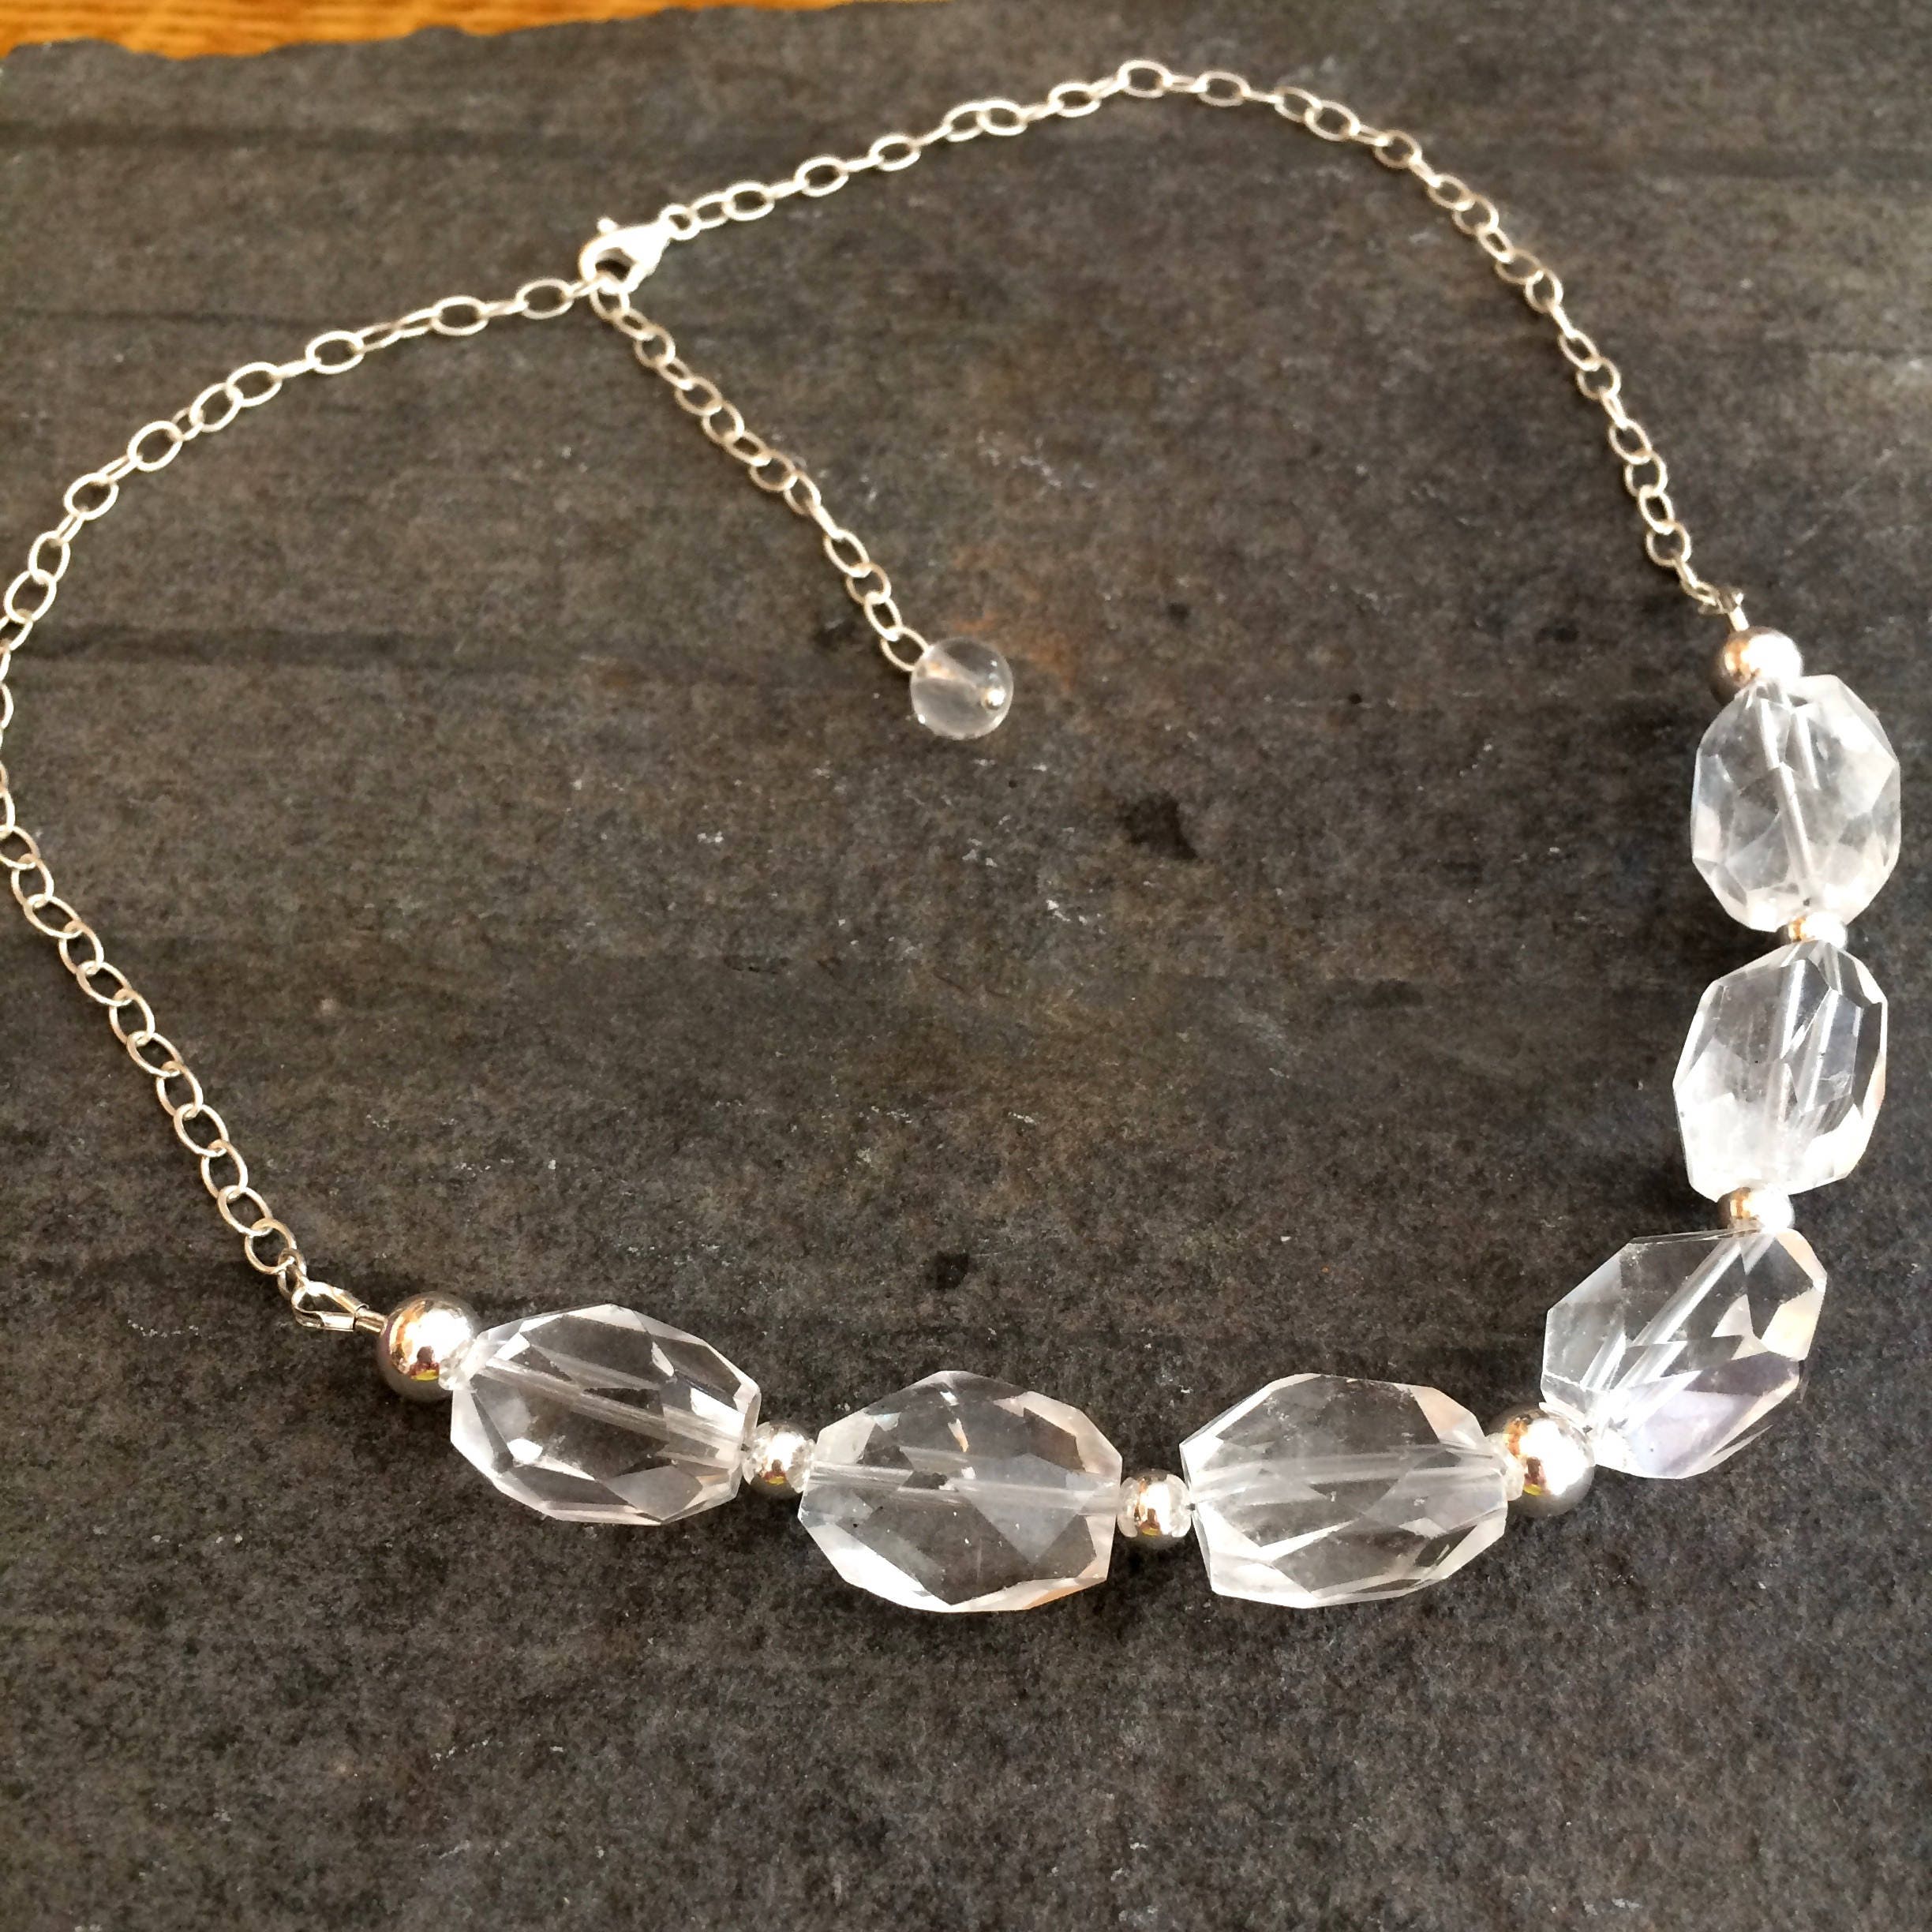 Faceted Crystal Bead Necklace | Graduated Strand of Rock Crystal